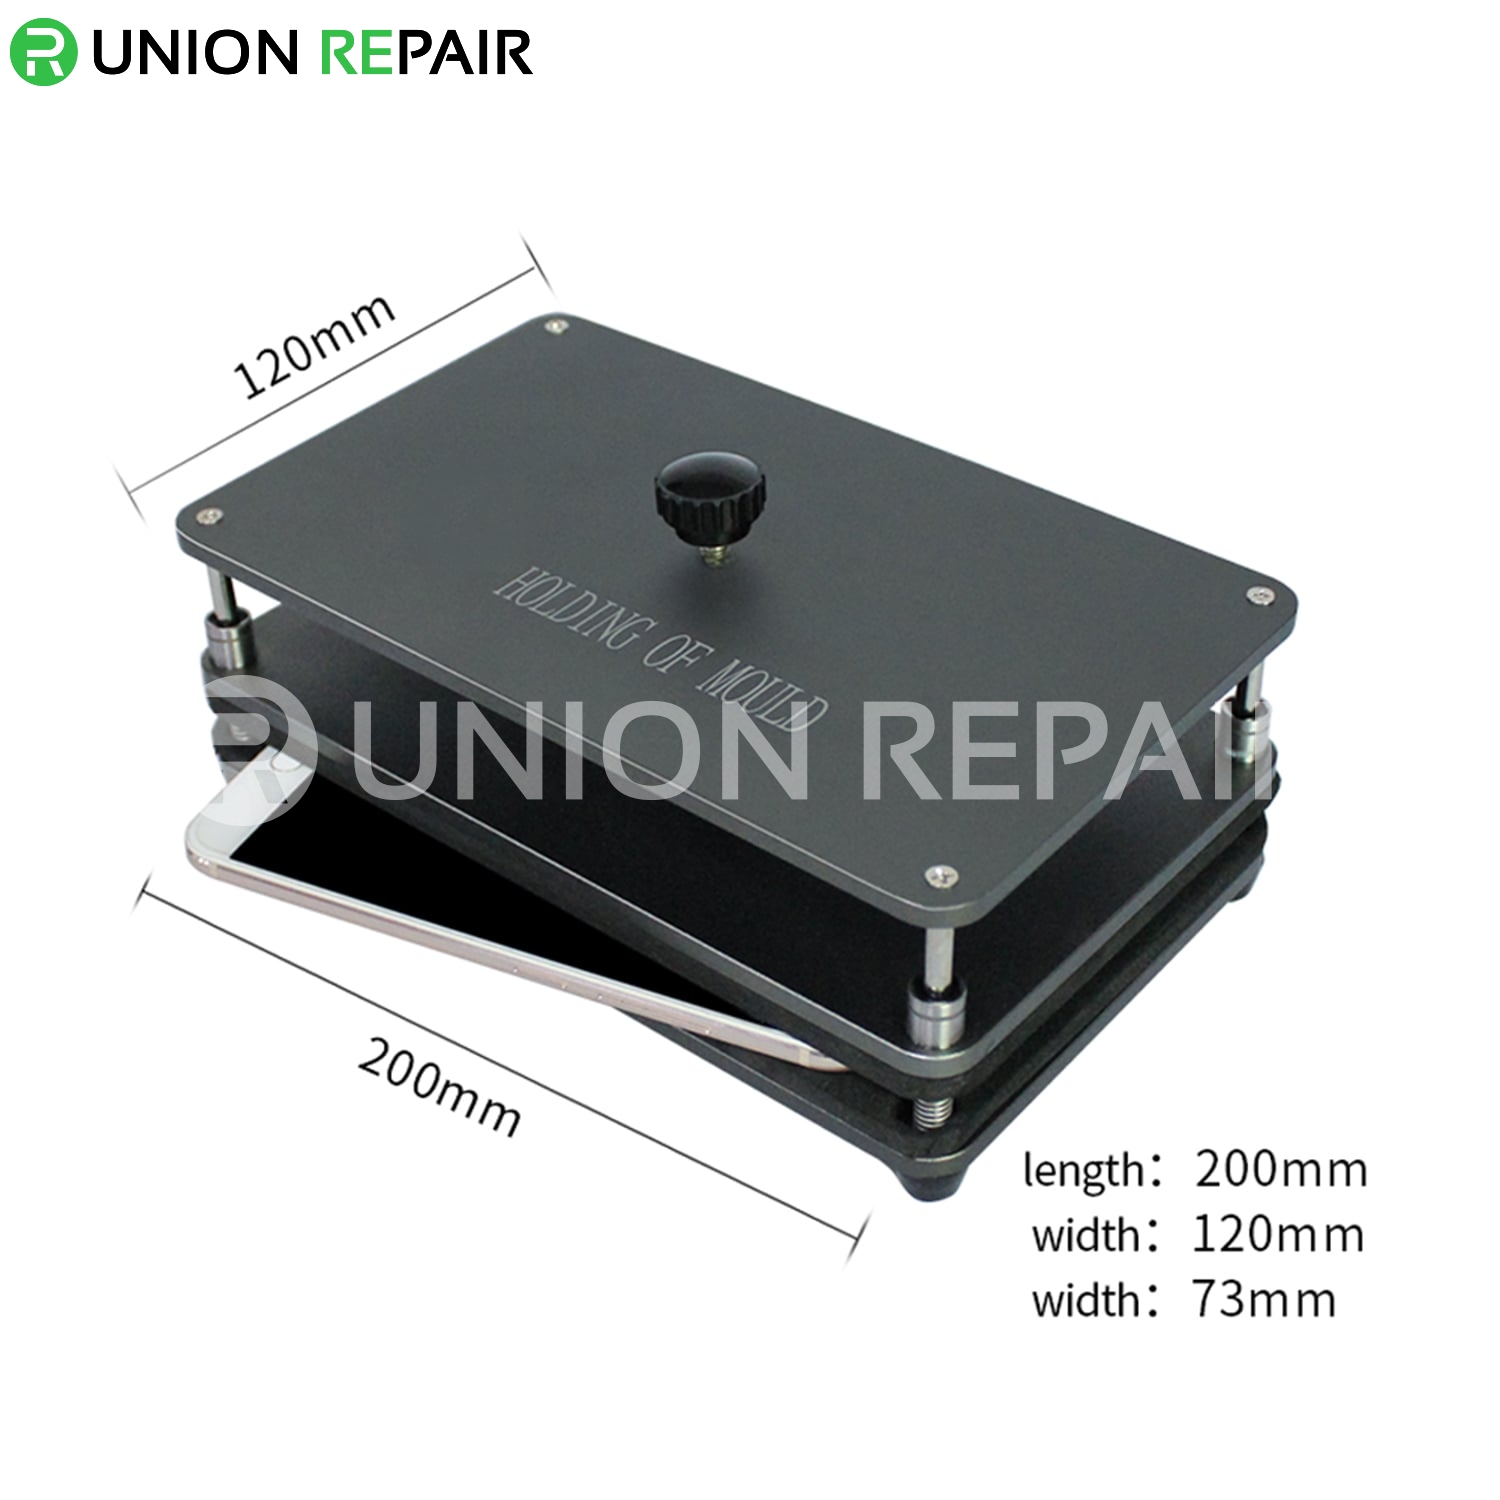 TBK Universal Back Cover Press Mould Fixture for TBK958A 958B 958C Laser Separator Machine